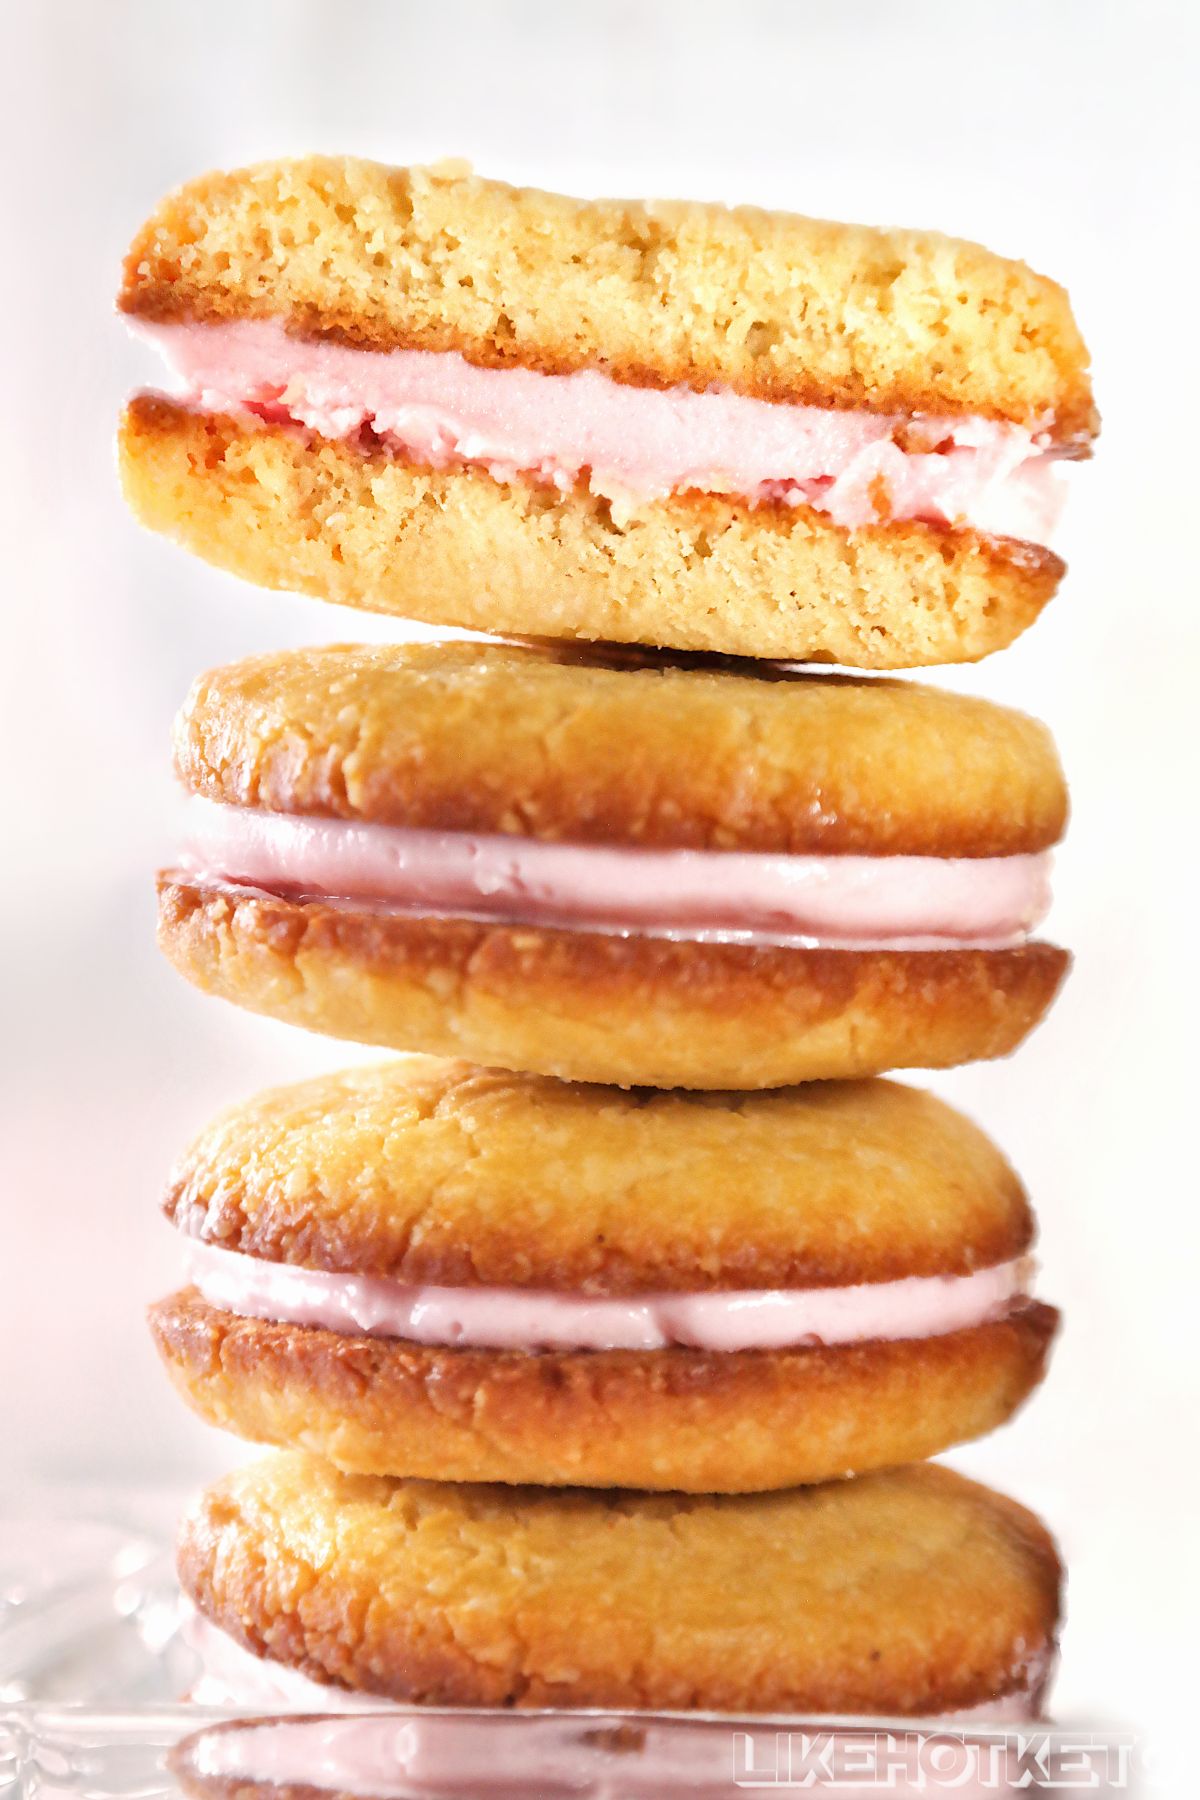 A pile of keto sugar-free sandwich cookies filled with strawberry cream.